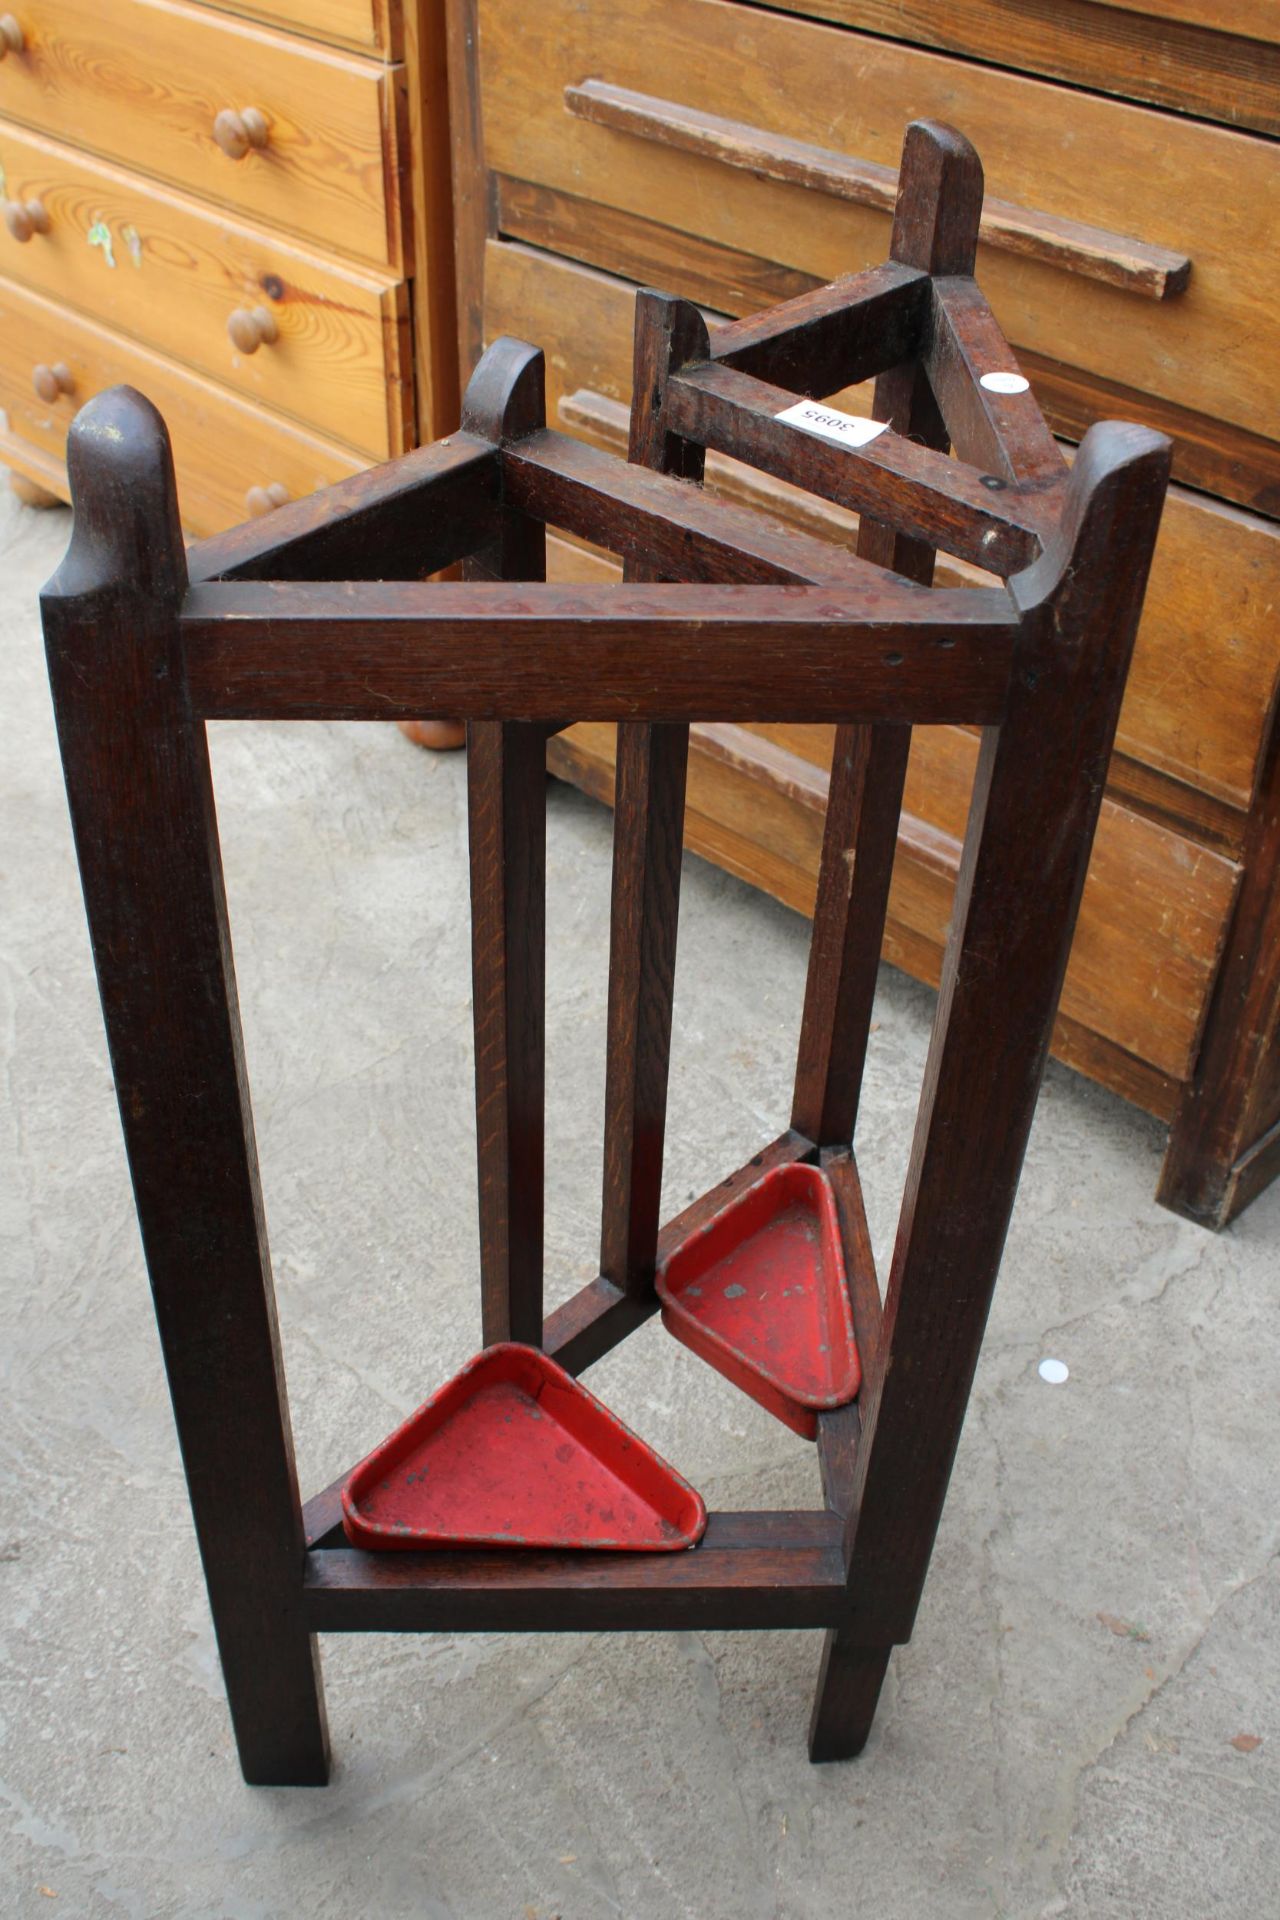 AN EARLY 20TH CENTURY OAK CORNER STICK STAND - Image 2 of 2